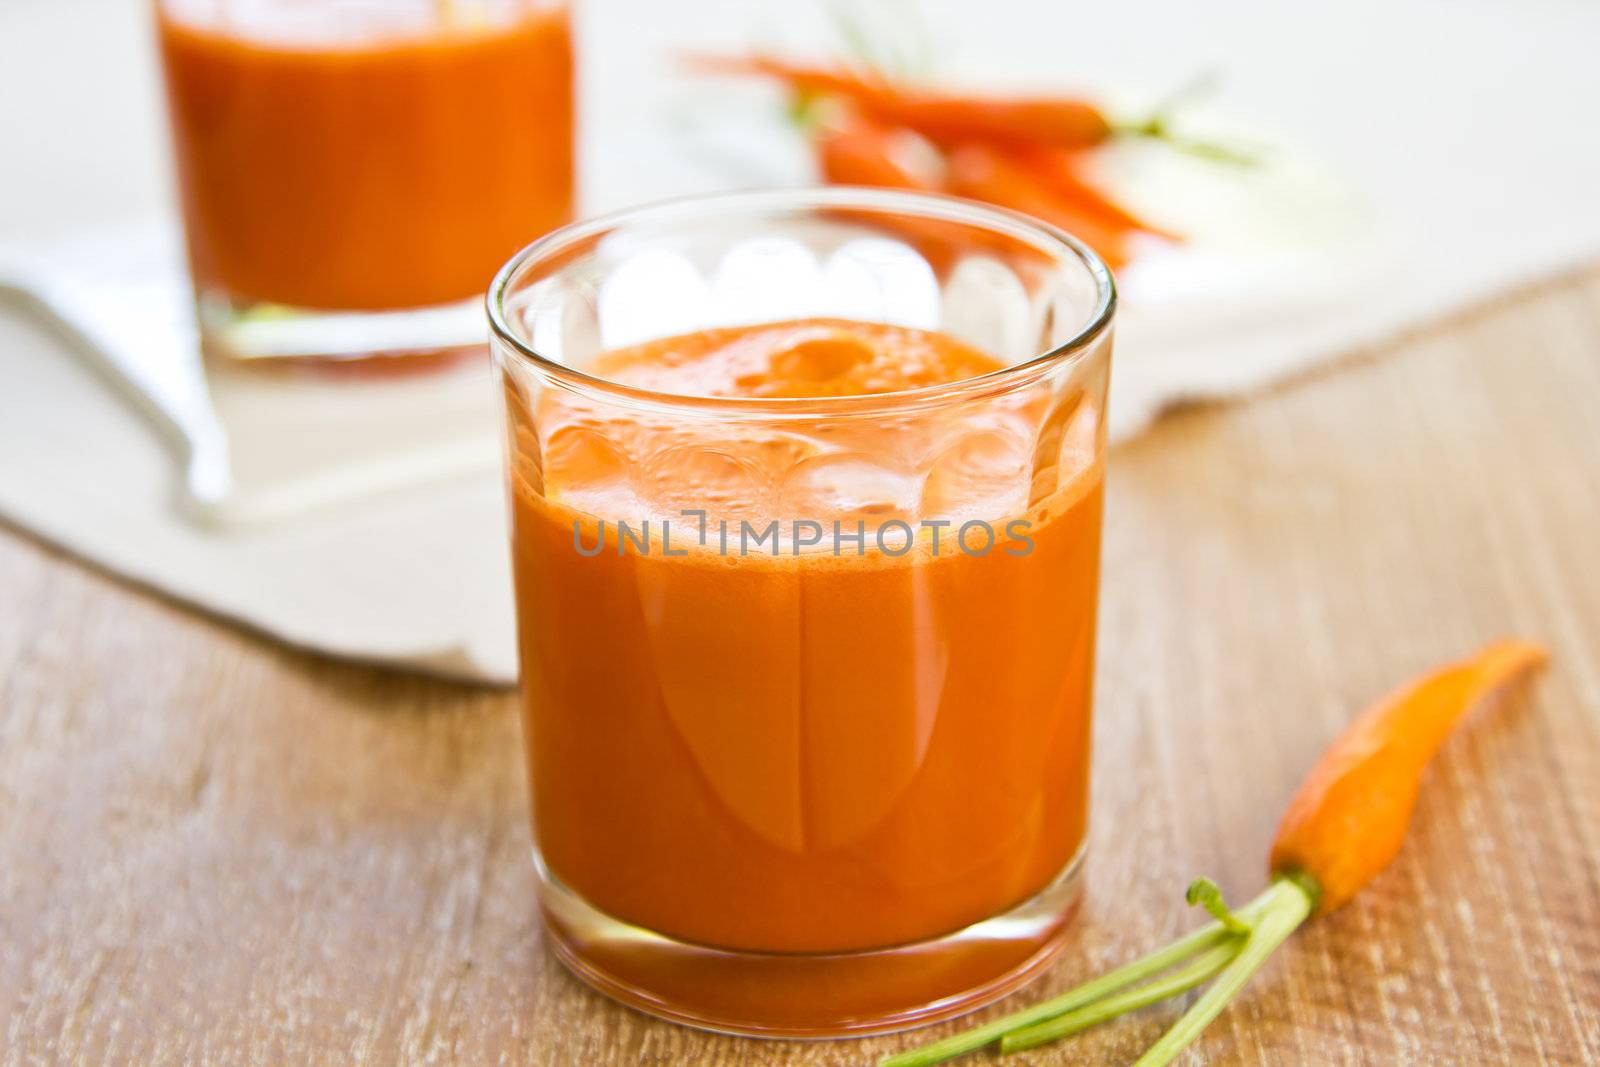 Carrot juice by baby carrot